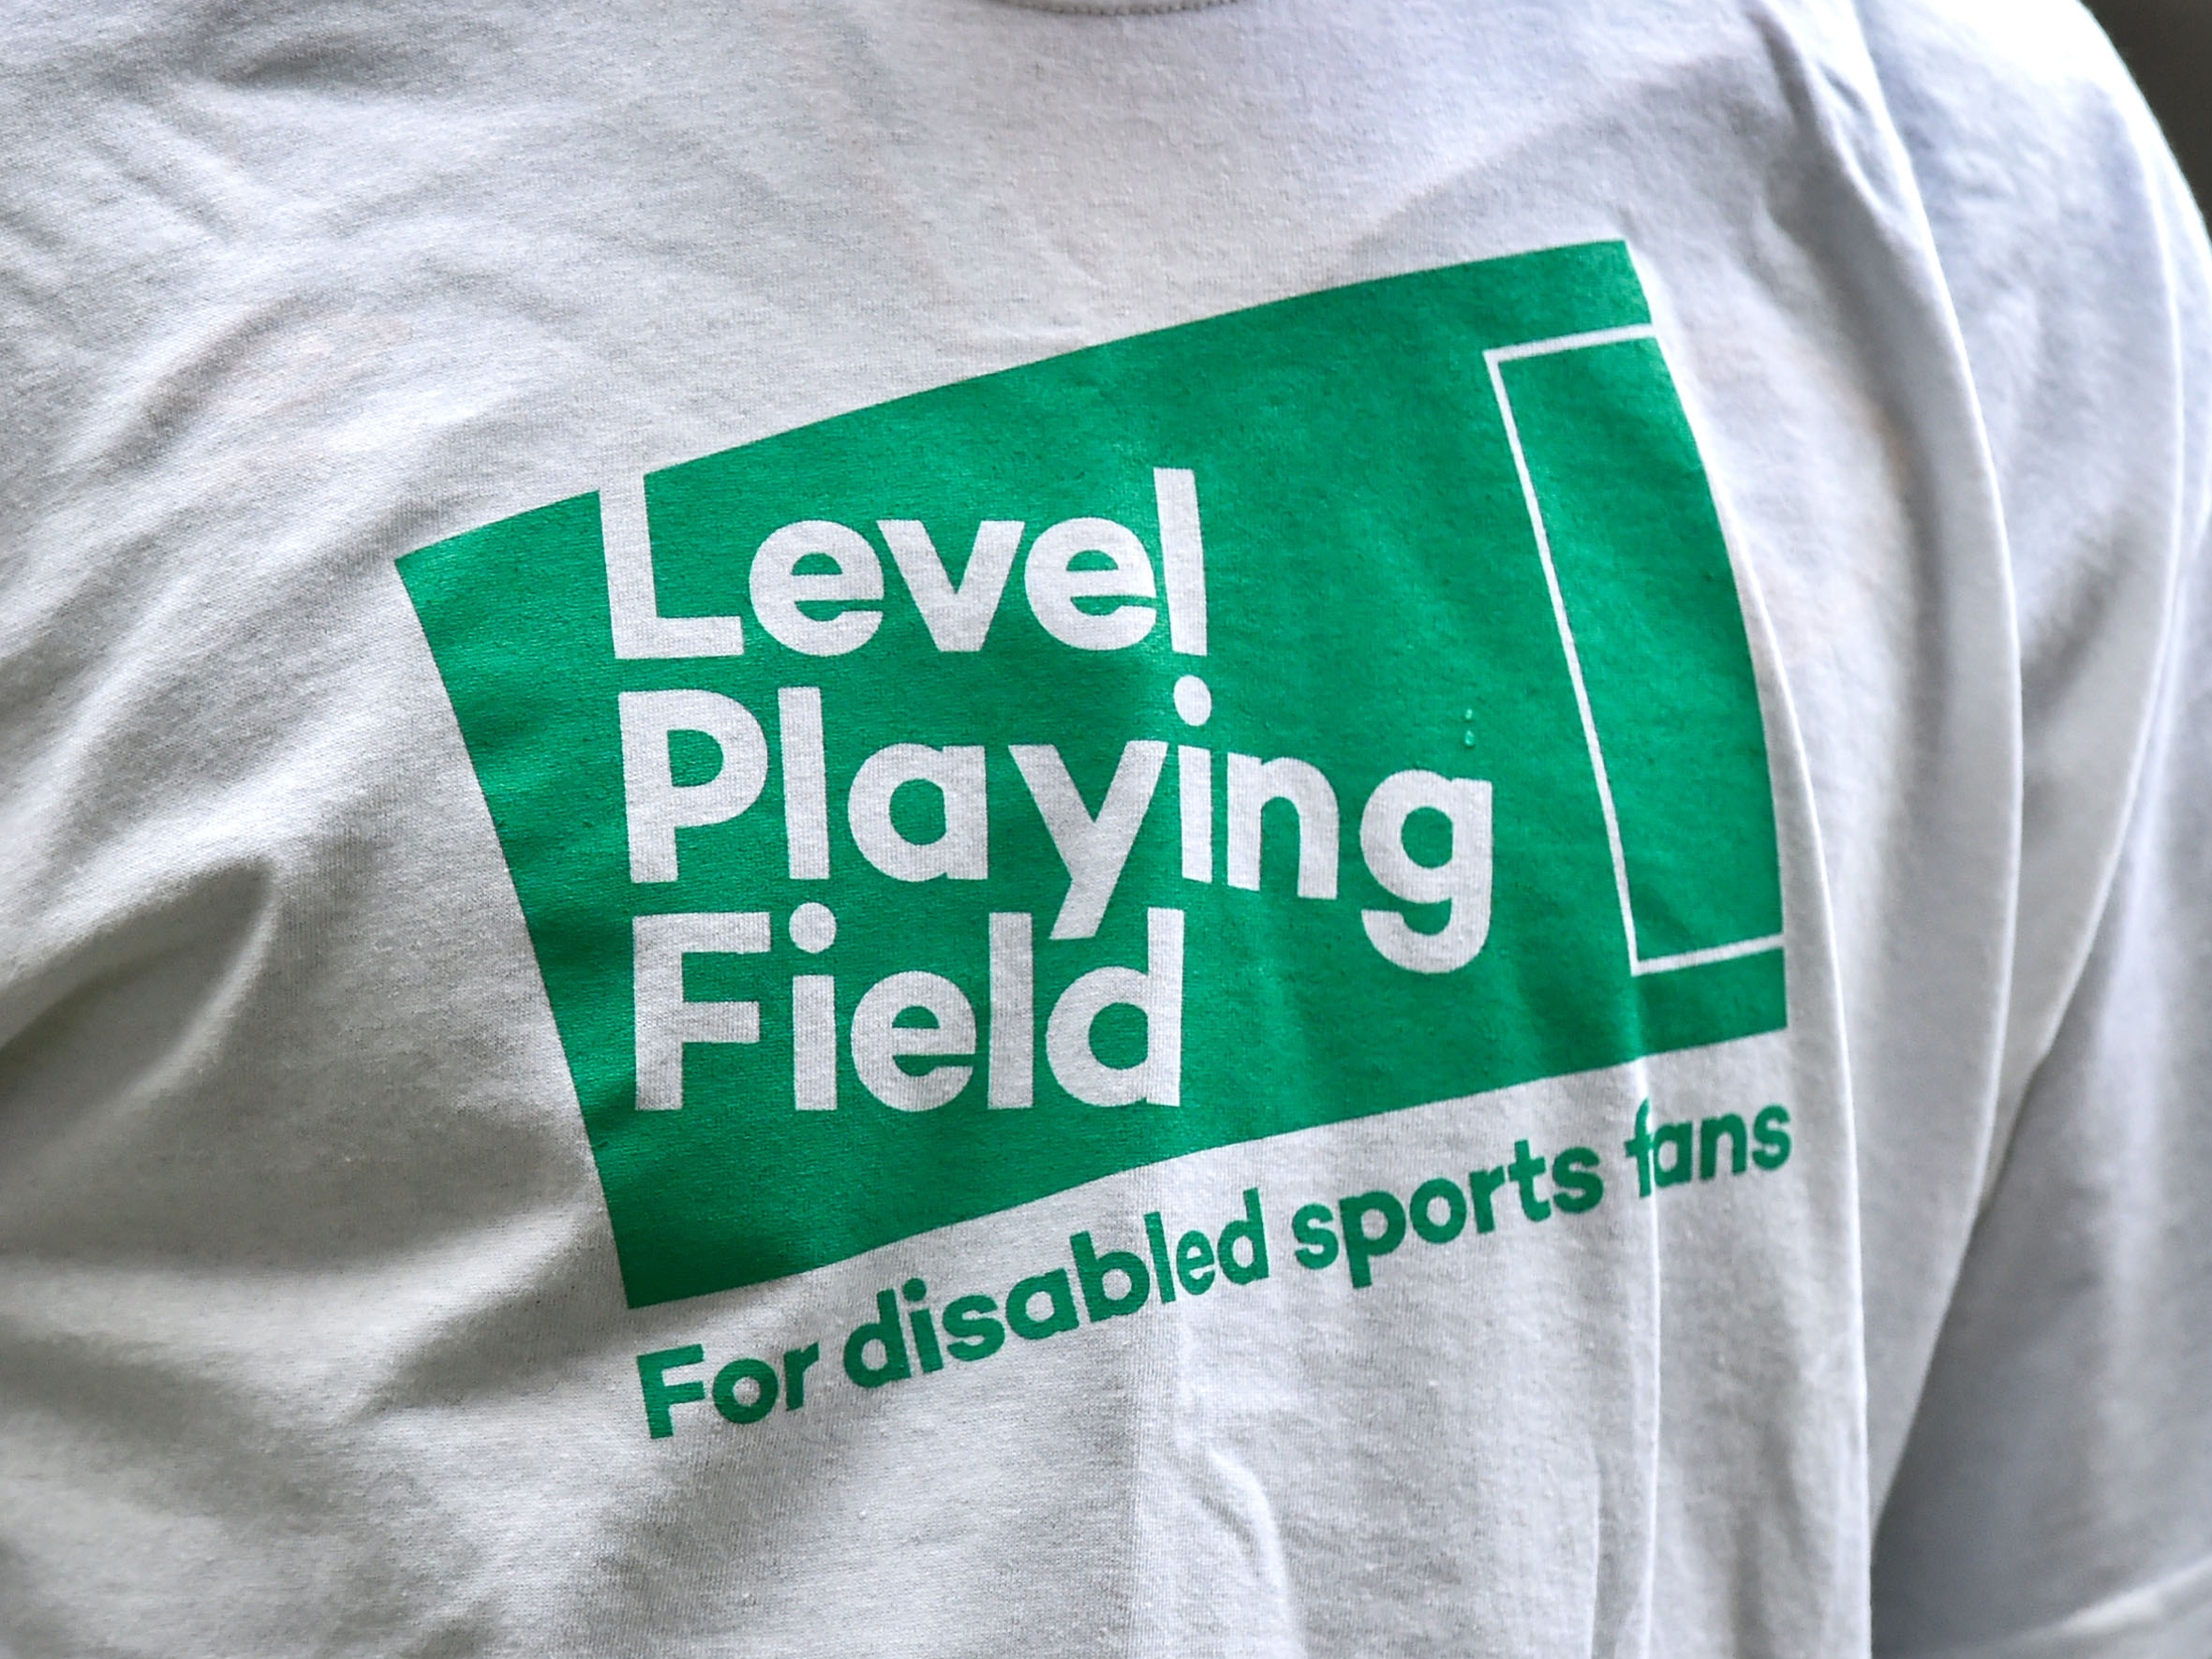 A Level Playing Field logo printed on to a white t-shirt 